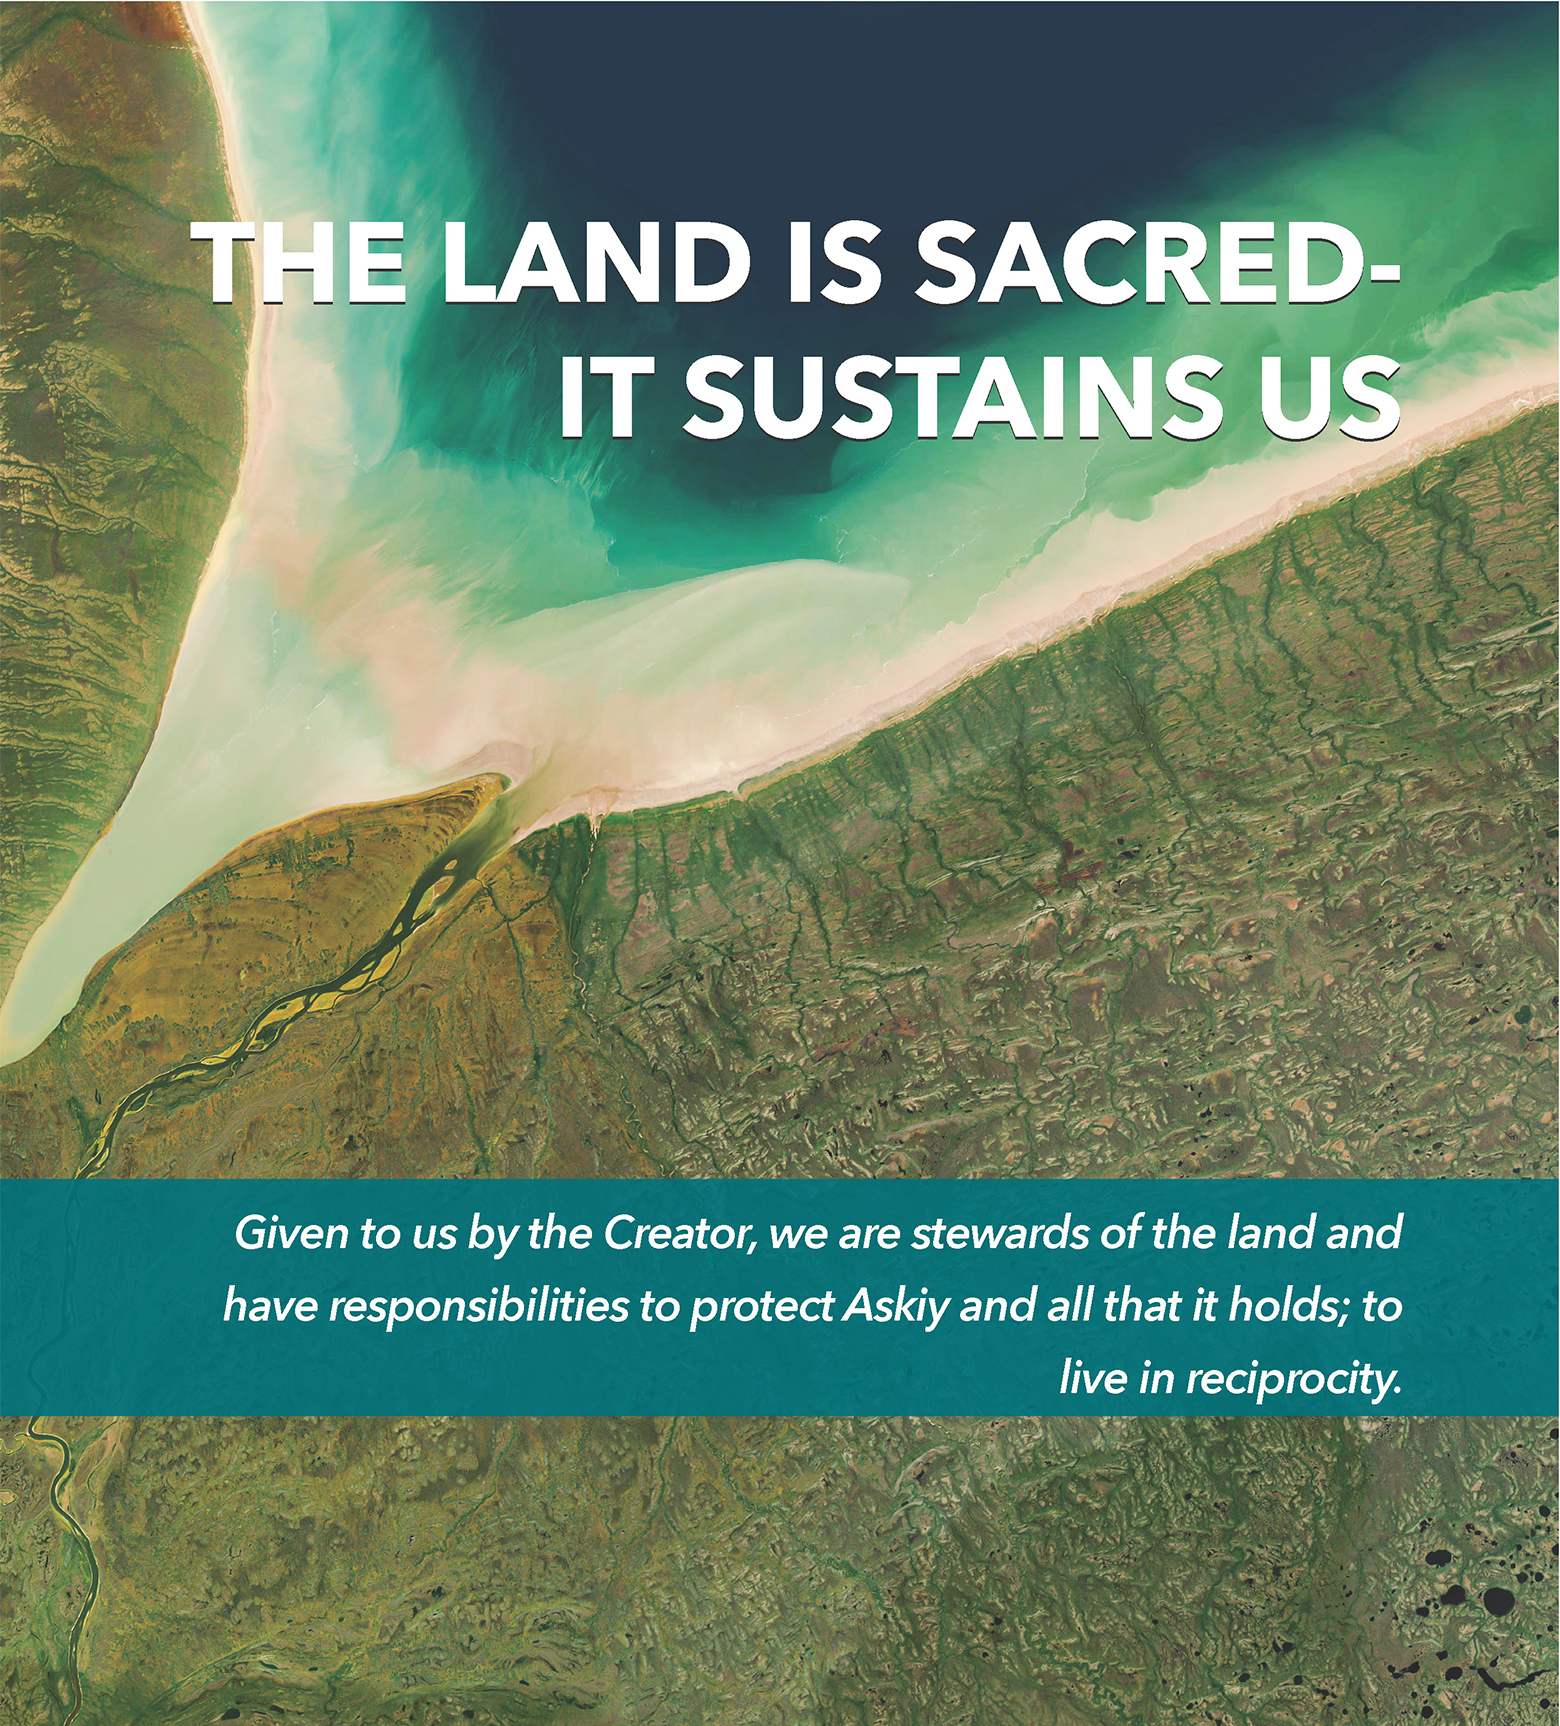 THE LAND IS SACRED - IT SUSTAINS US